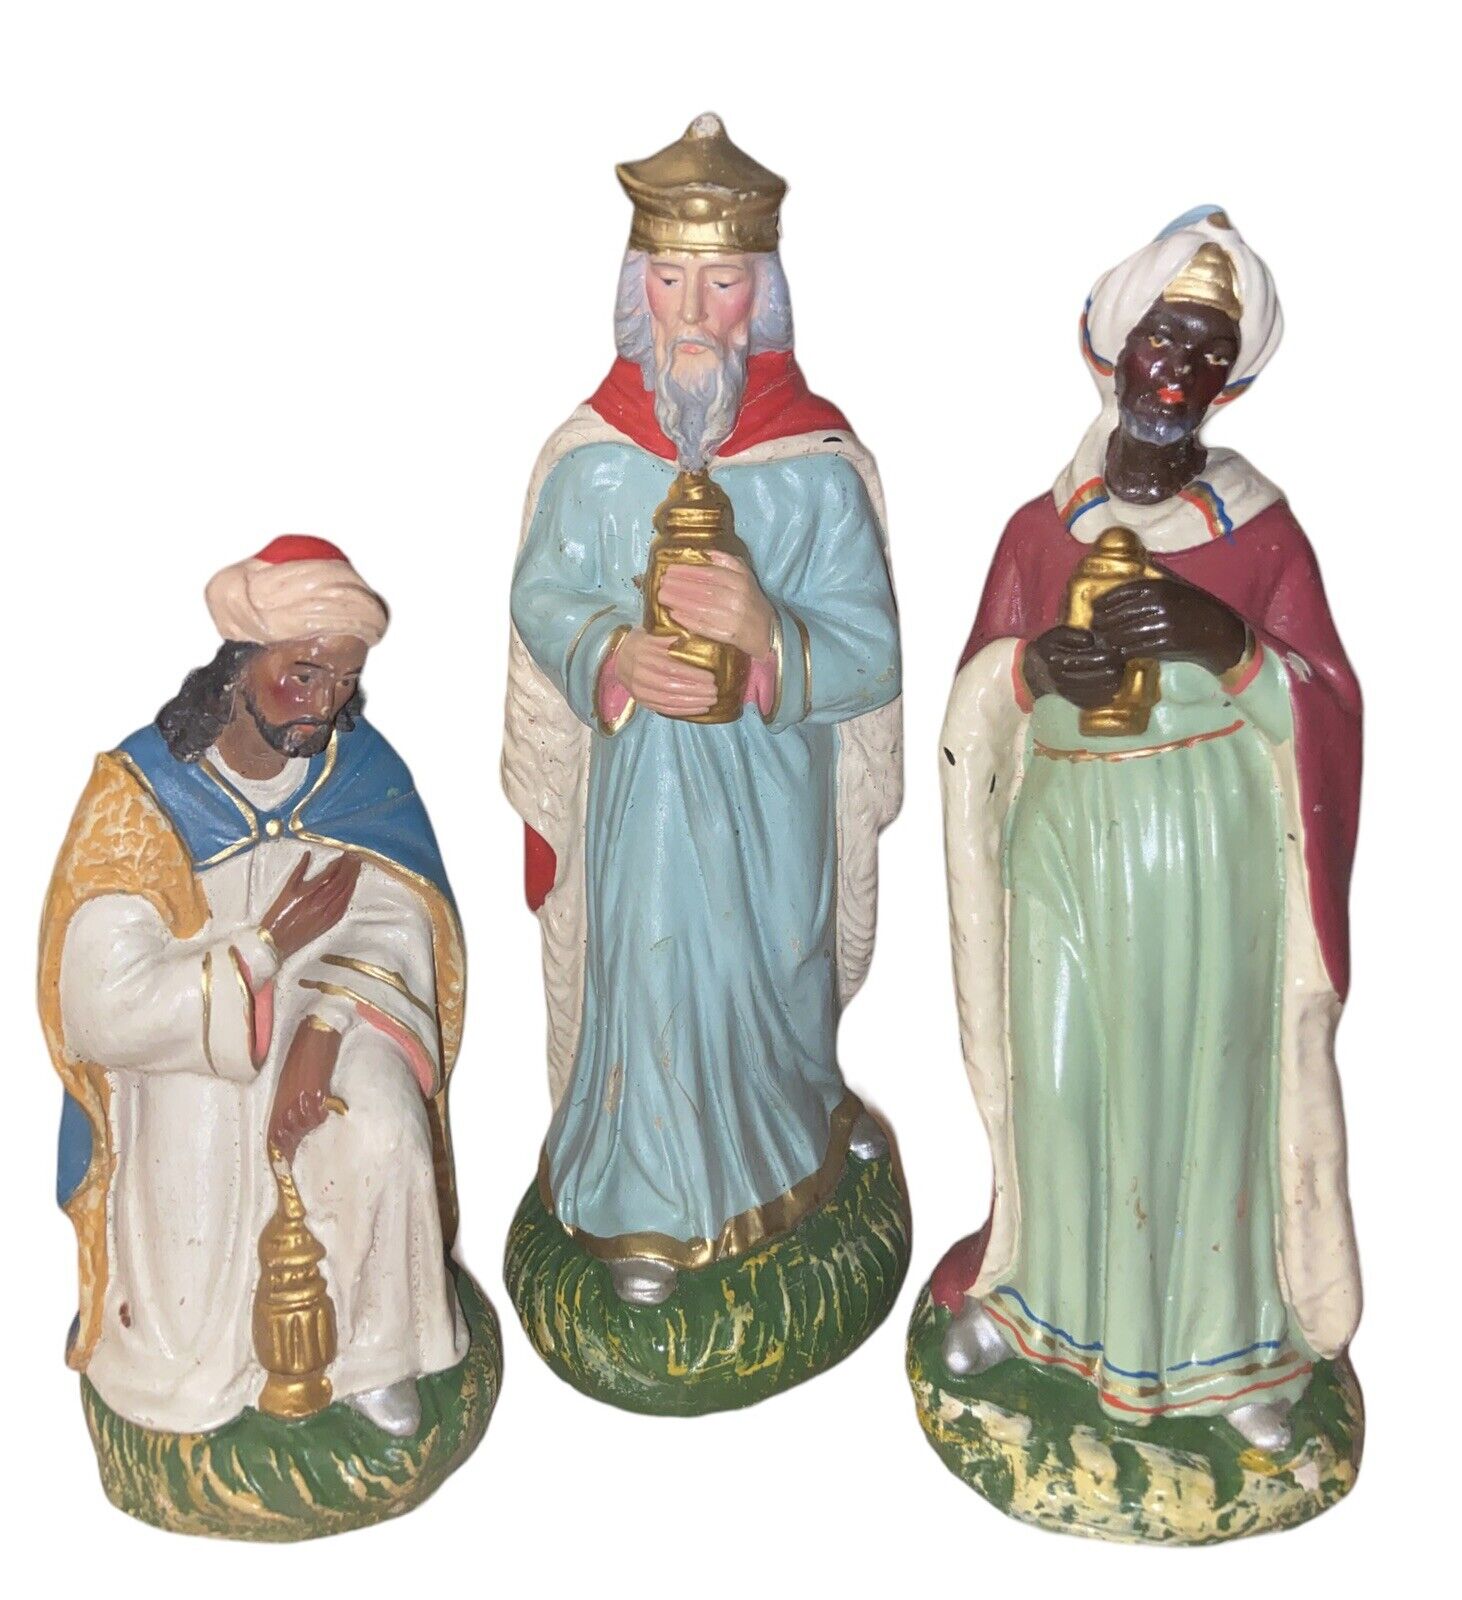 Lot of 3 Vintage Fontanini Italy Paper Mache Hand Painted Nativity Wisemen Kings